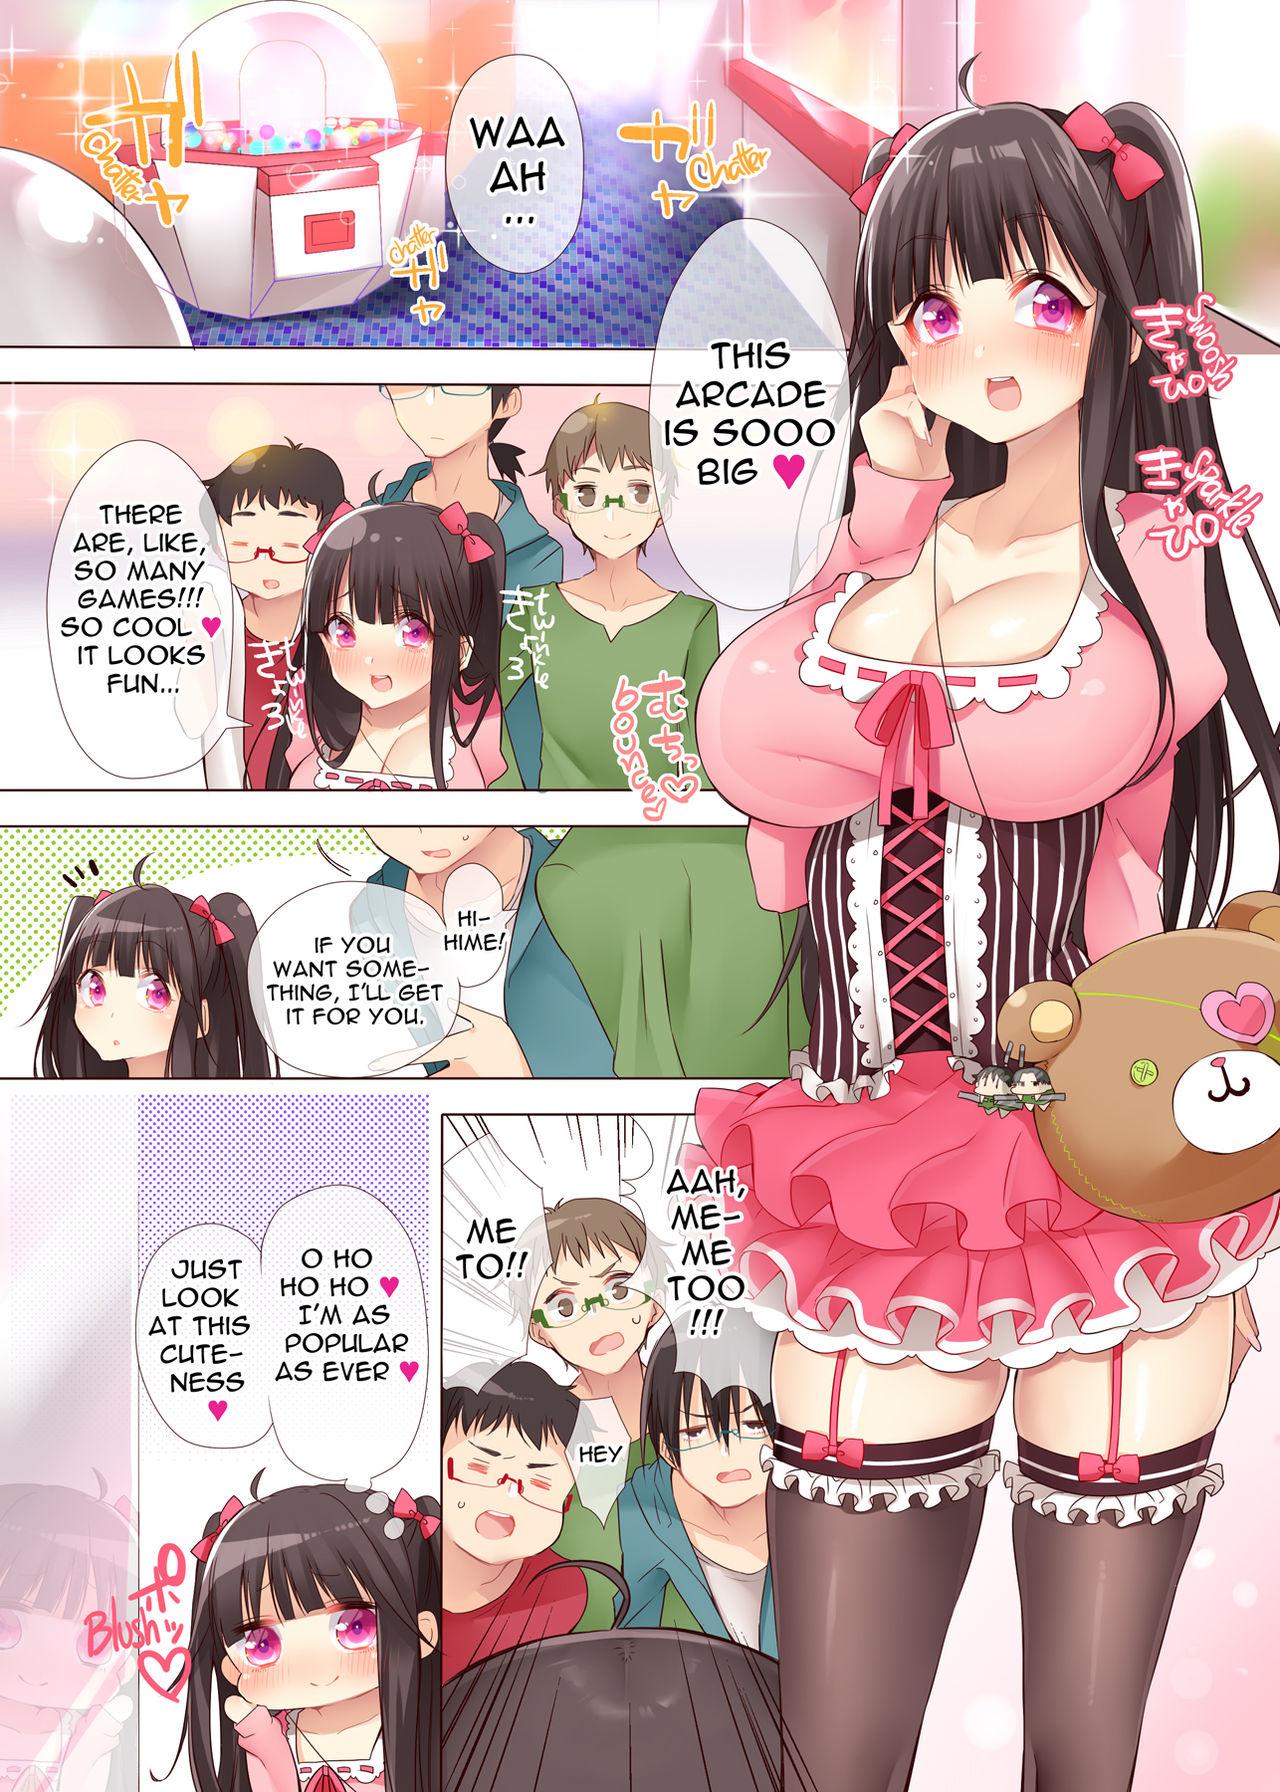 Sucking Cock The Princess of an Otaku Group Got Knocked Up by Some Piece of Trash So She Let an Otaku Guy Do Her Too!? Hot Girl Fuck - Page 2